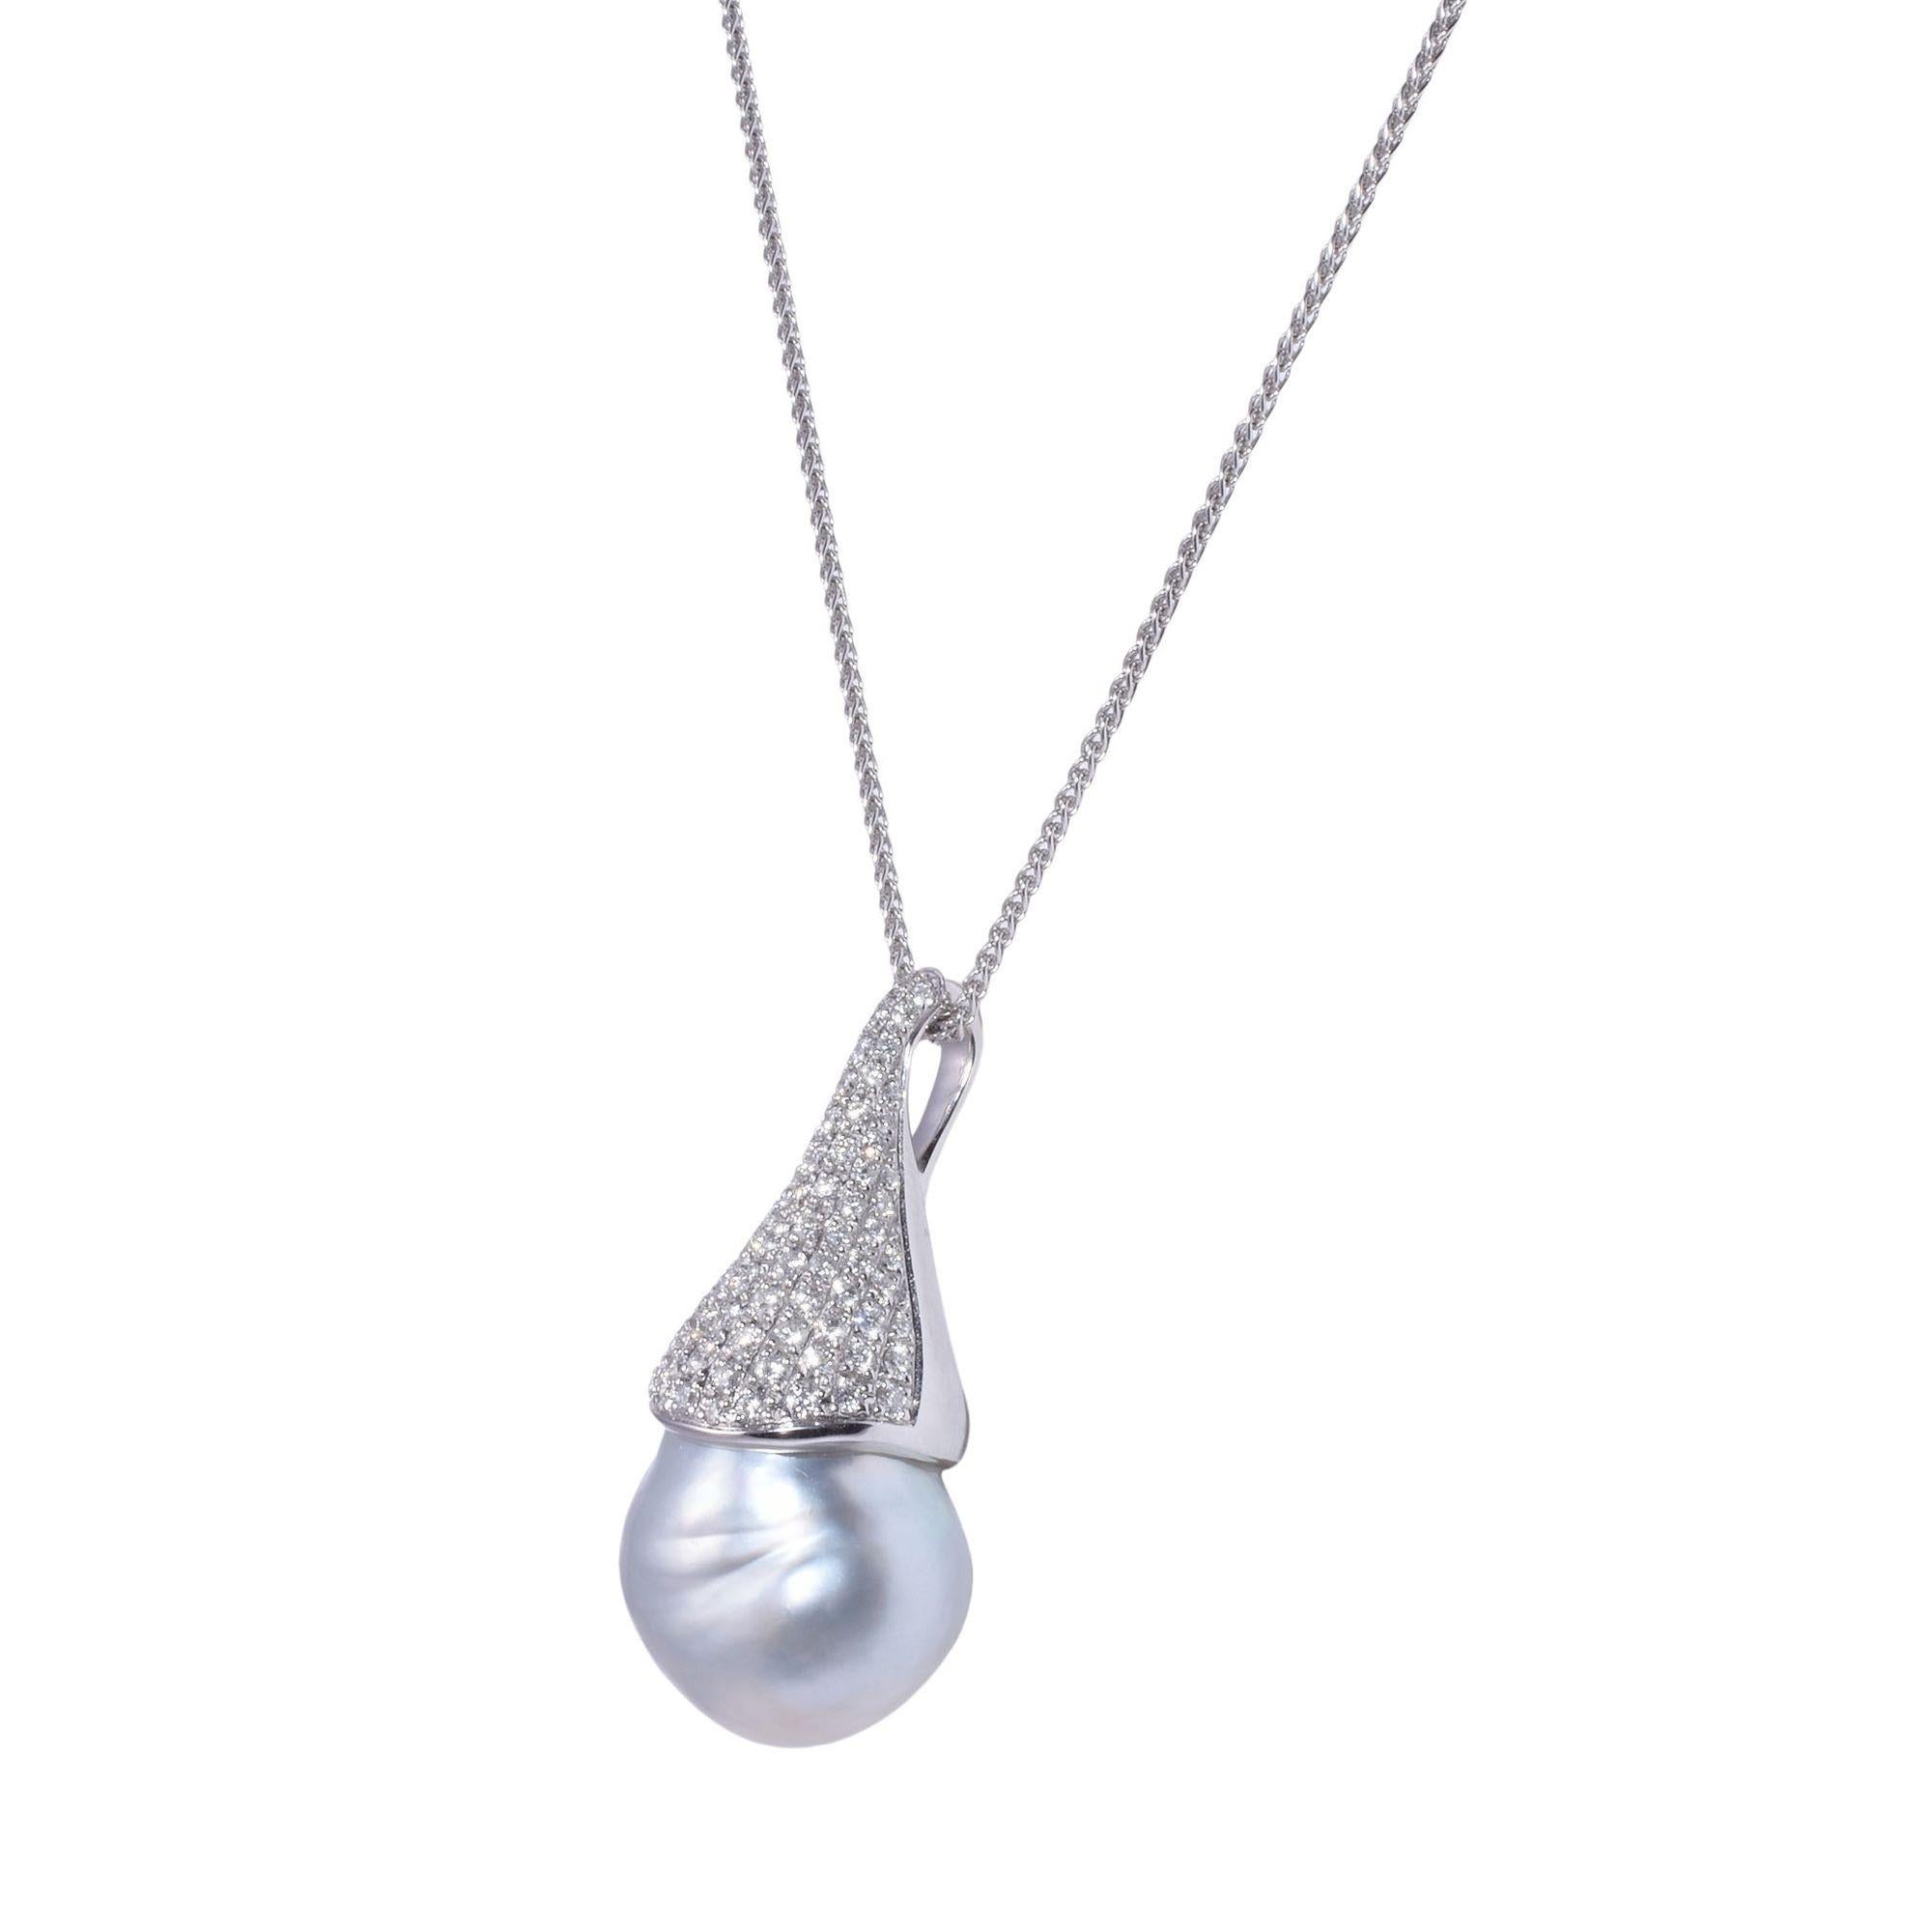 Round Cut Rare Large Baroque South Seas Pearl Pendant Necklace For Sale